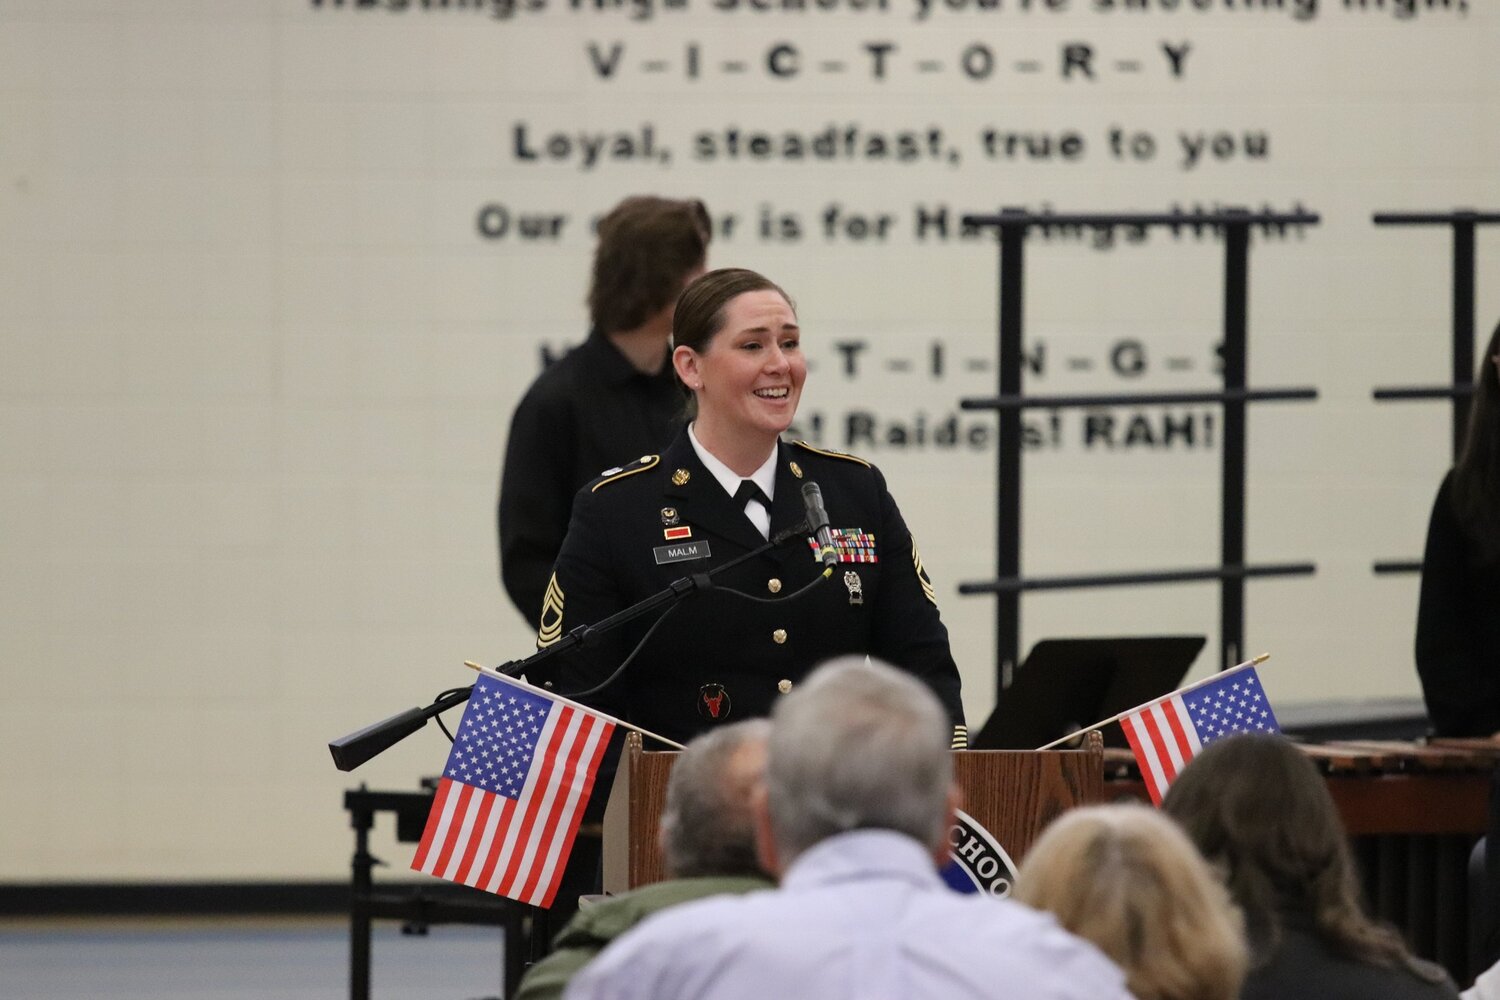 Hastings School Board Director Master Sgt. Stephanie Malm was the keynote speaker at the Veterans Day program. Her message resonated with veterans and students alike.